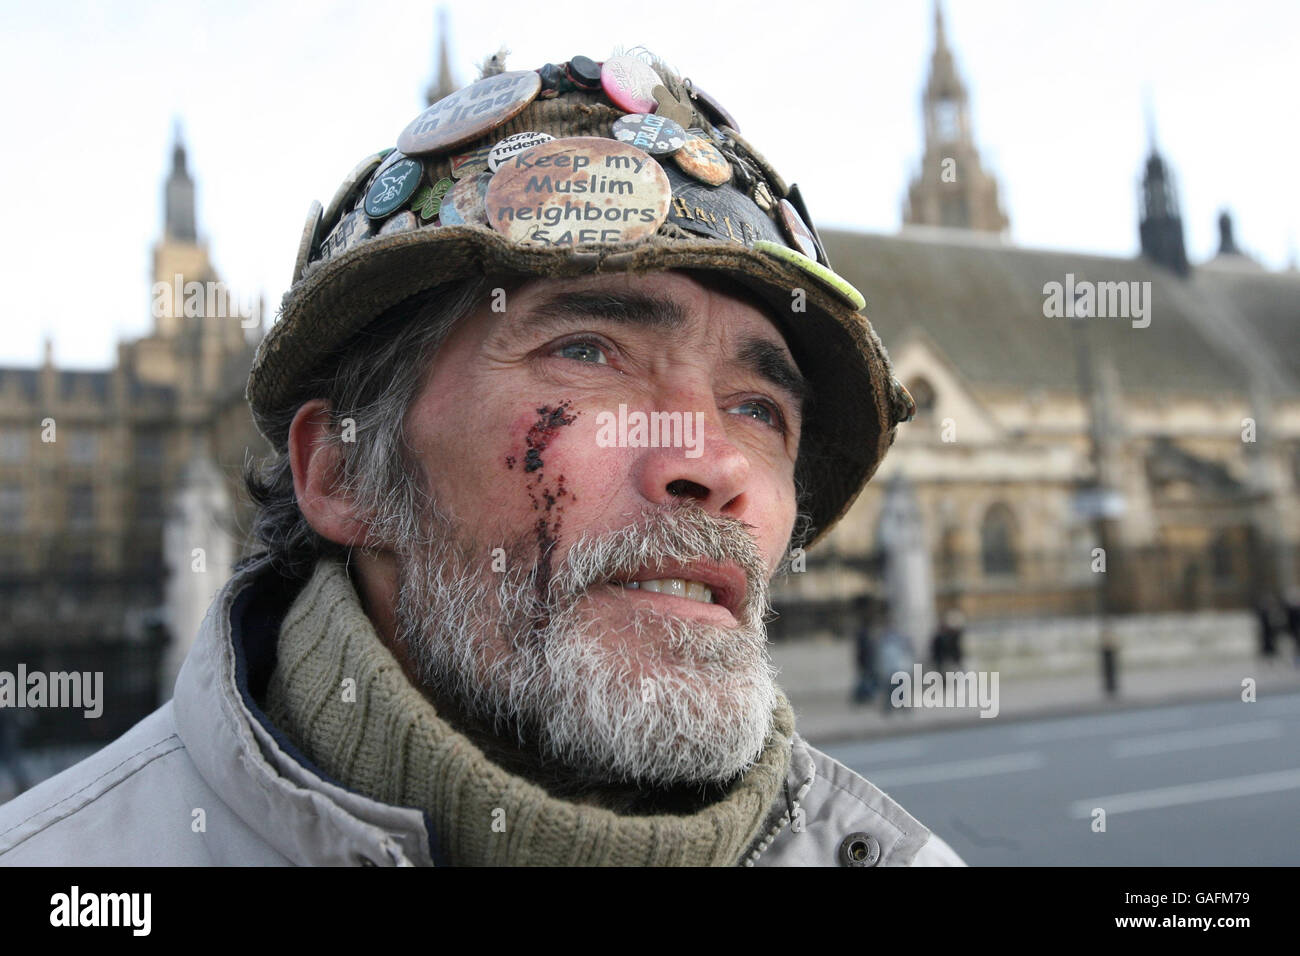 Peace campaigner Brian Haw, who was left with cuts to his face and wrist after being arrested outside Downing Street during a protest against the Serious Organised Crime and Police Act (Socpa), stands in front of the Houses of Parliament a day after he was allegedly assaulted by a police officer. Stock Photo